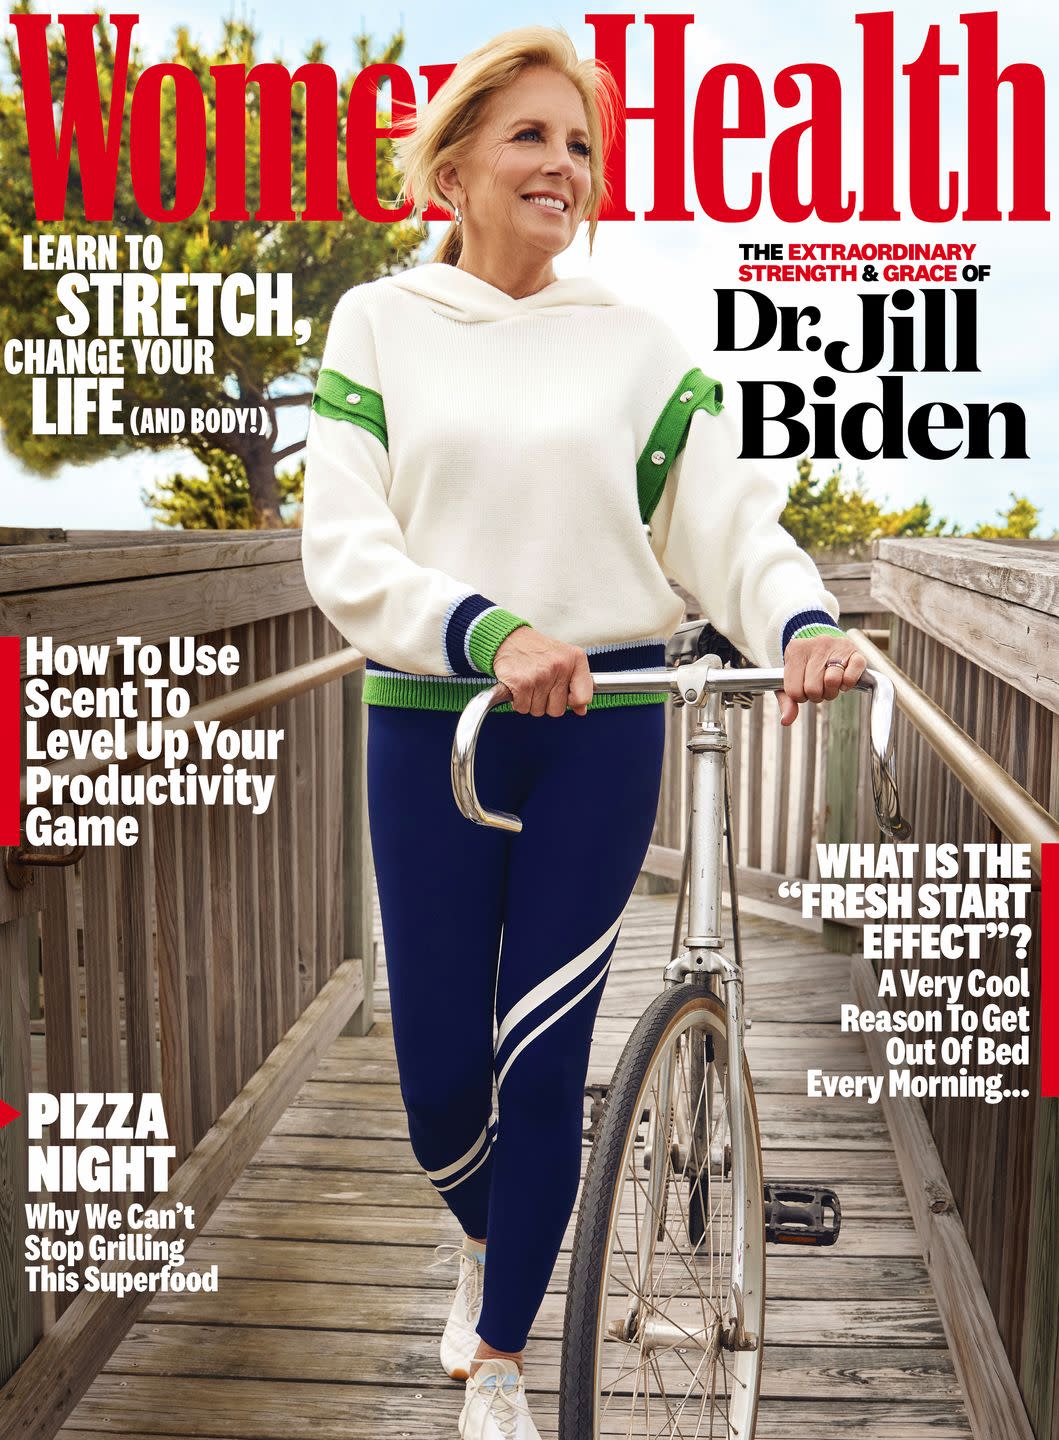 women's health cover with first lady jill biden walking along boardwalk, smiling and holding onto a bike, coming from the beach